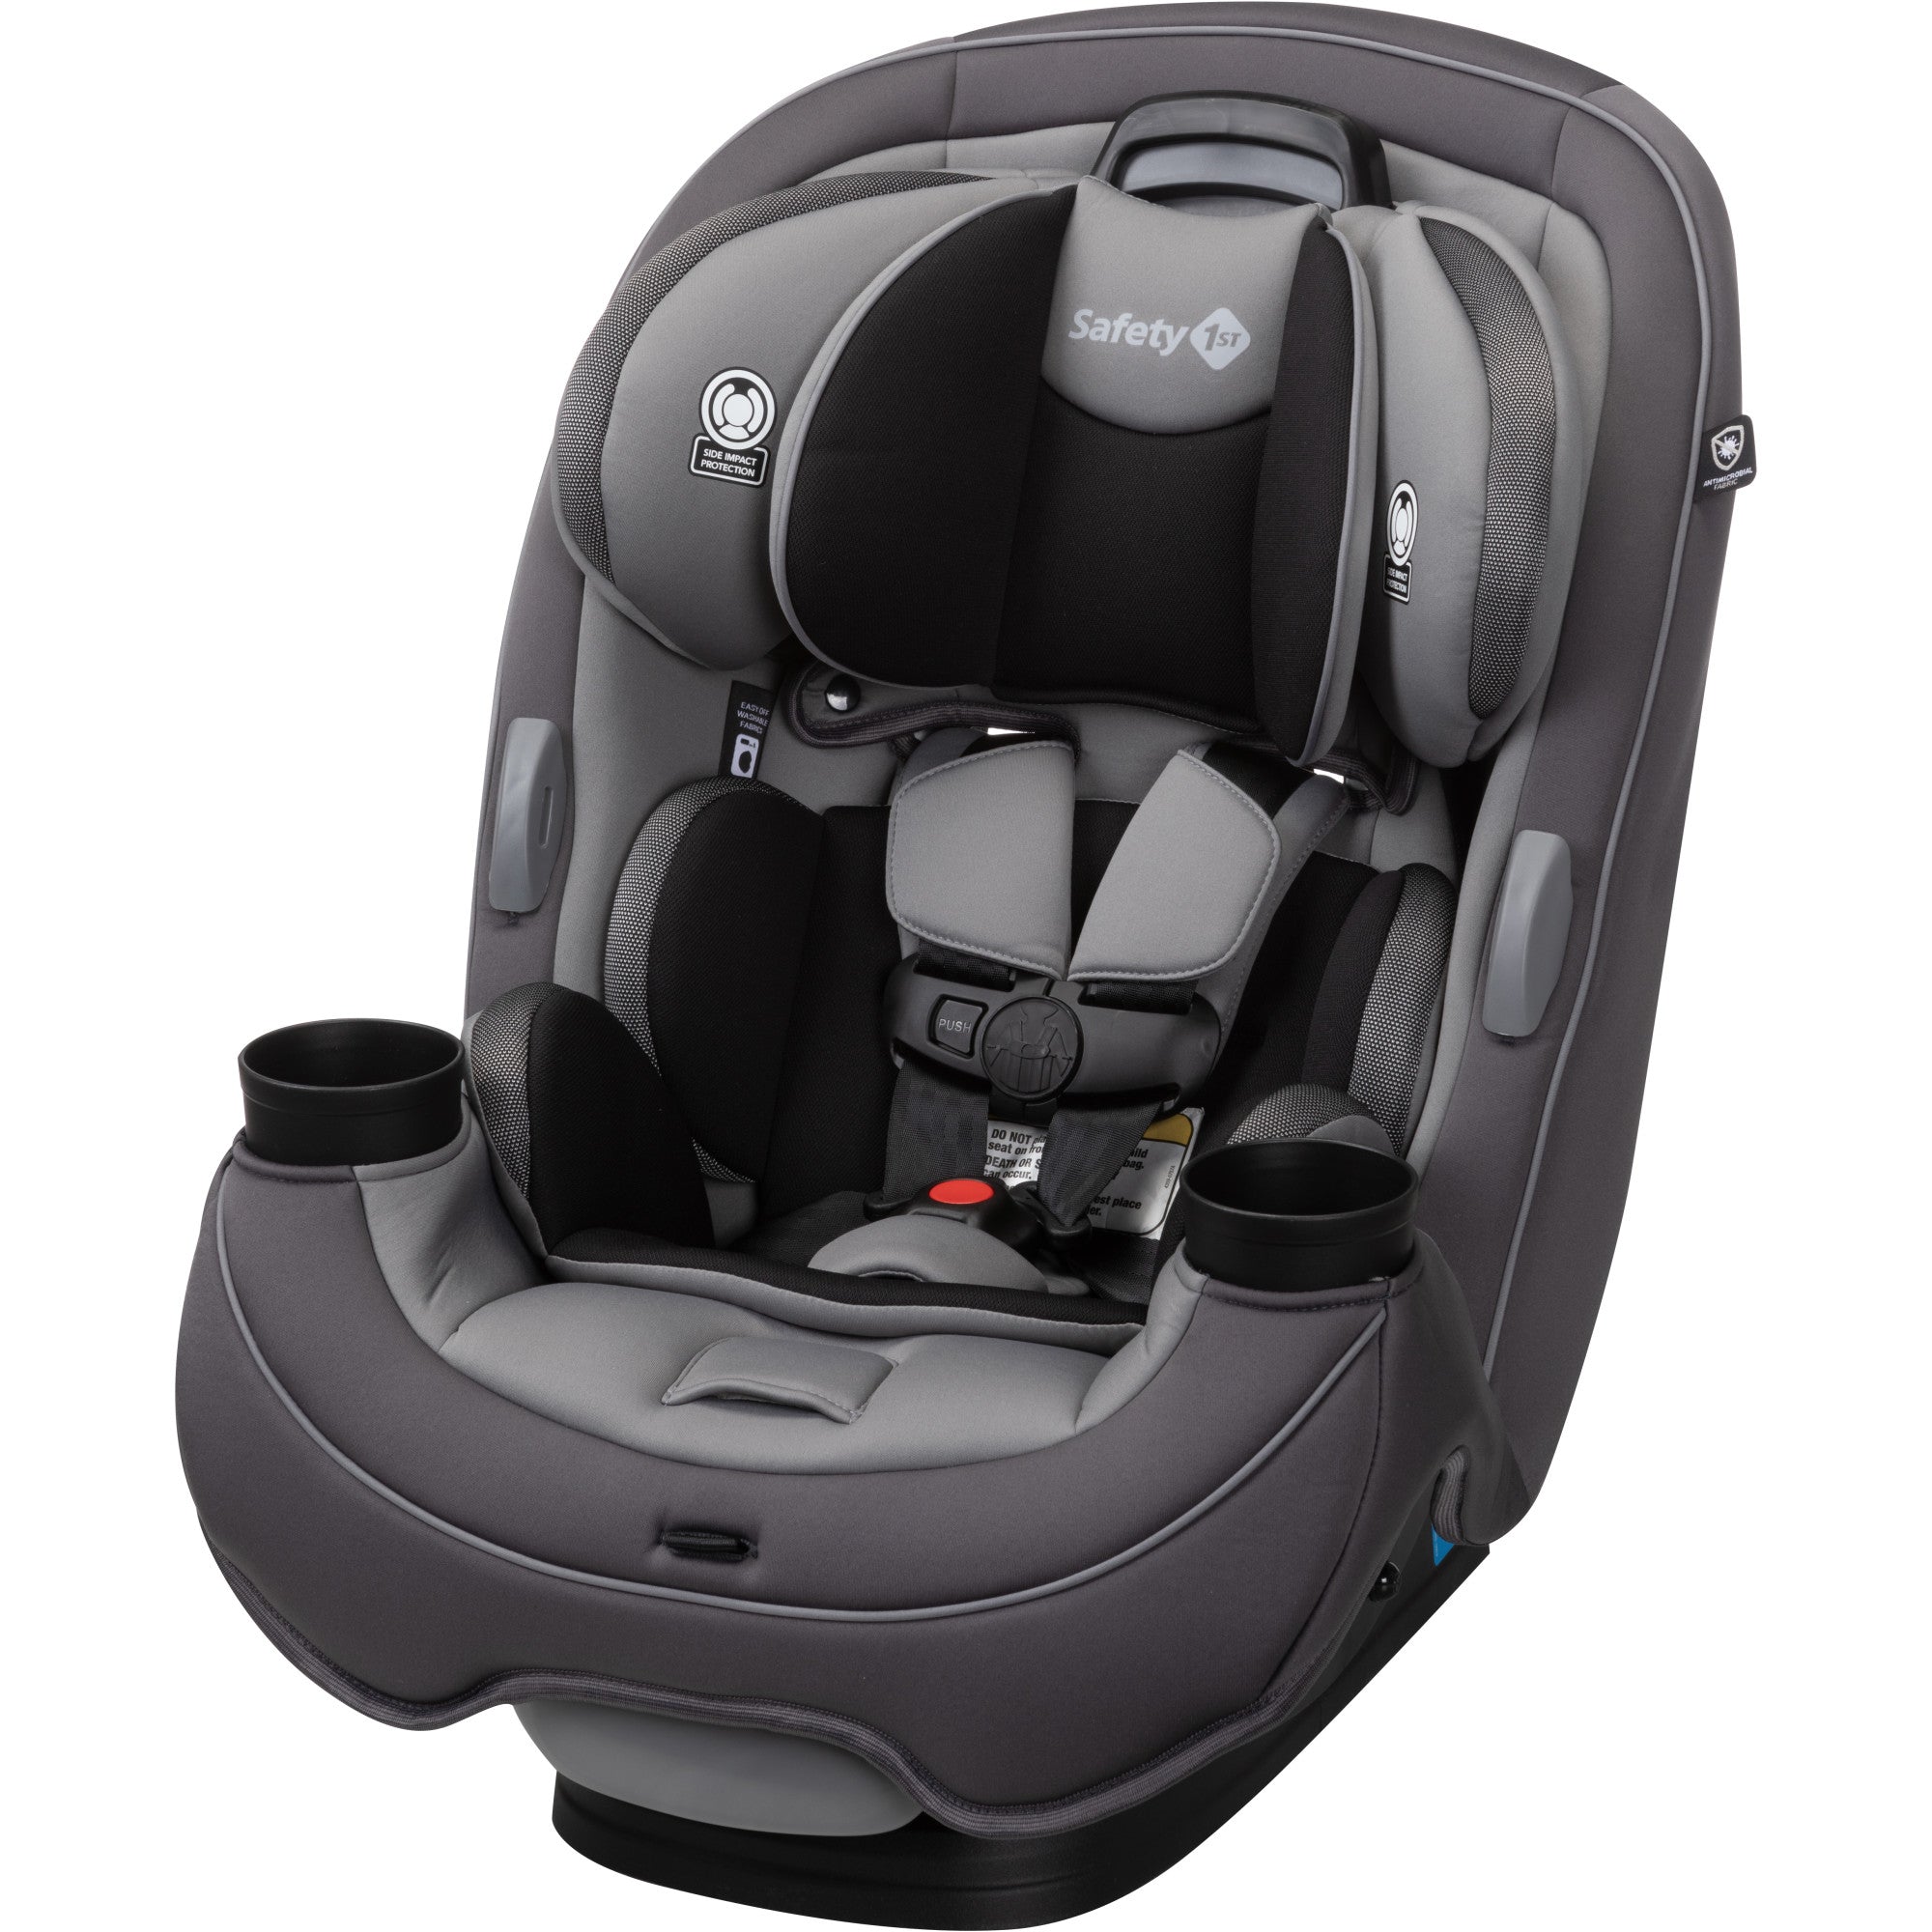 Safety 1st car seat in grey